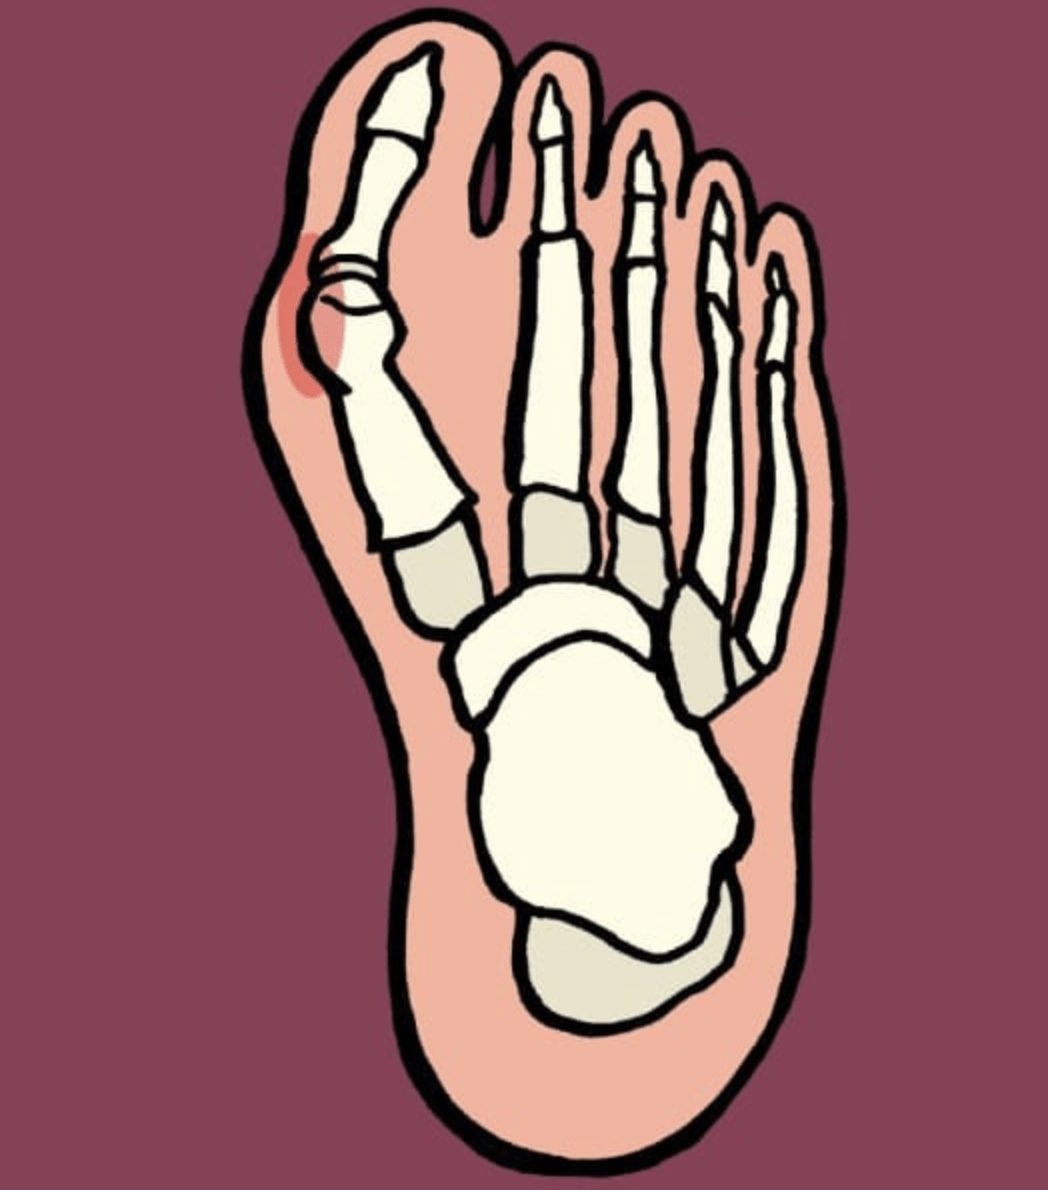 symptoms and signs of a bunion